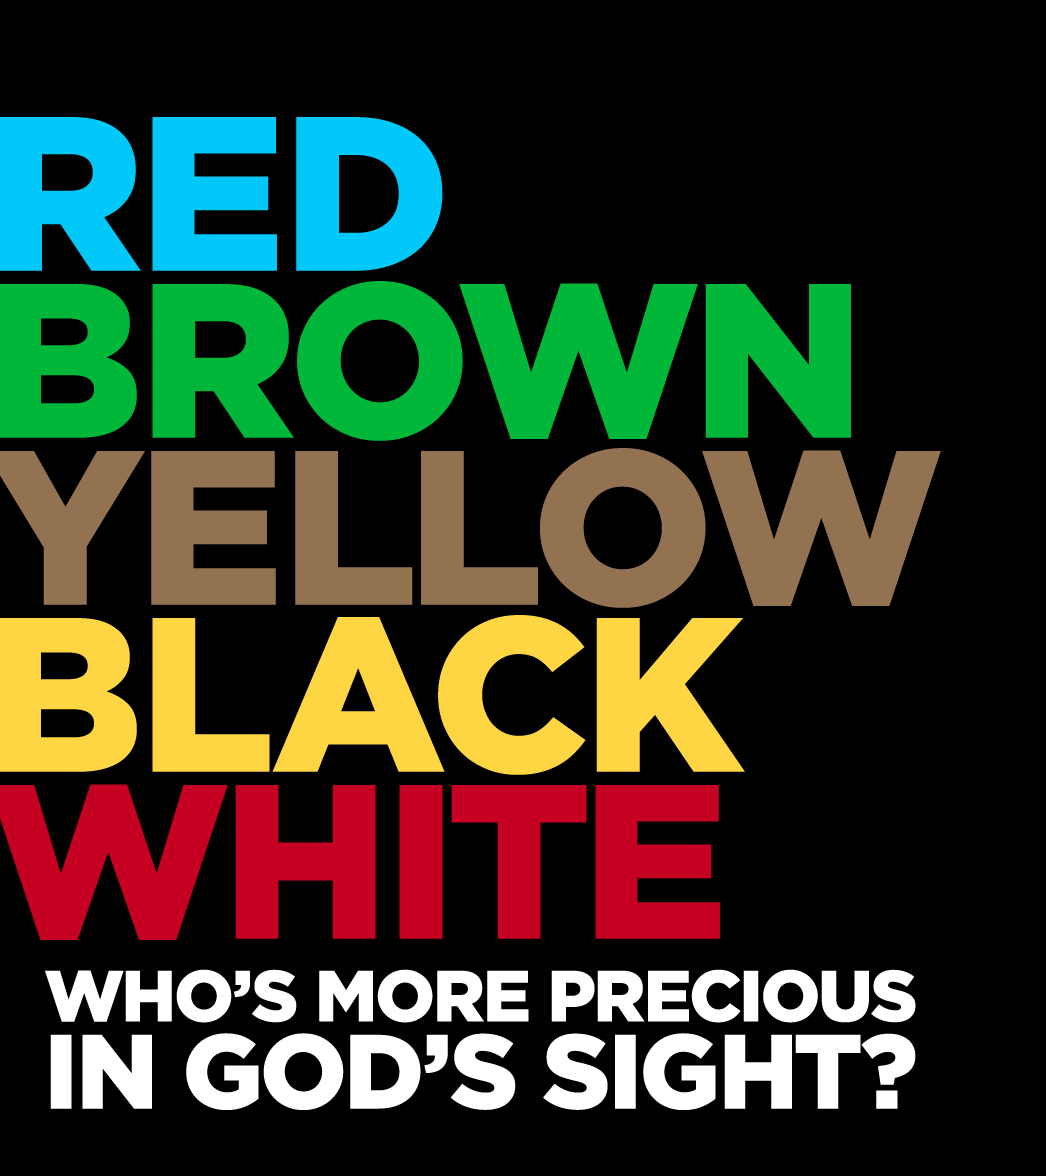 Red and Yellow Word Logo - Red Brown Yellow Black White - Who's More Precious in God's Sight ...